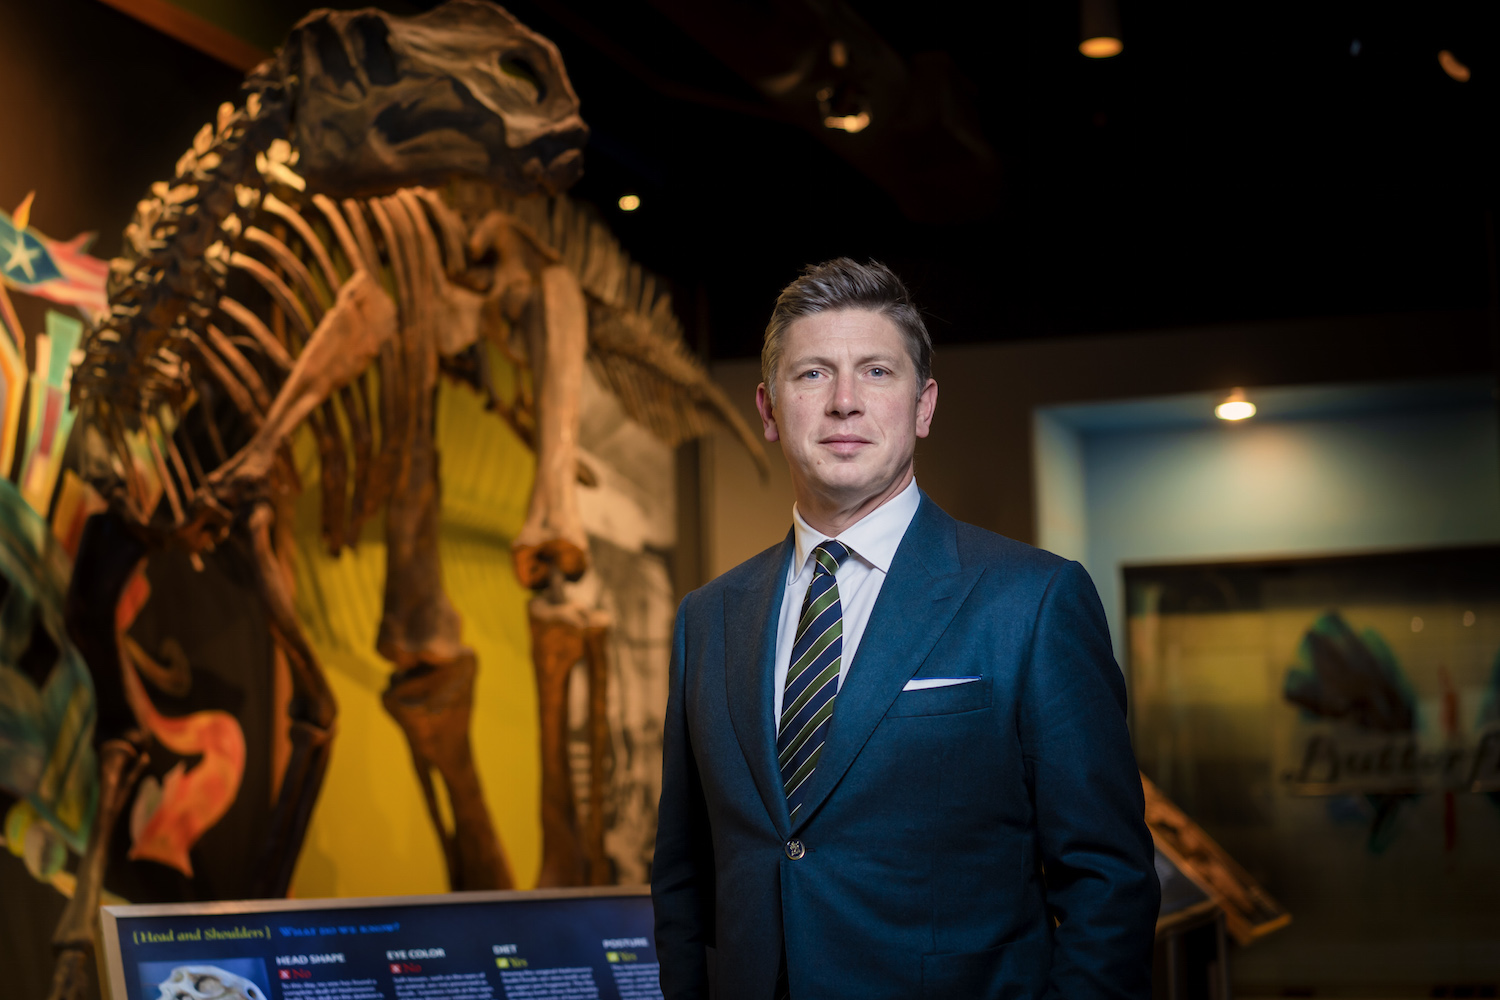 Scott Cooper, PhD, President and CEO, The Academy of Natural Sciences of Drexel University. Photo by: Jeff Fusco